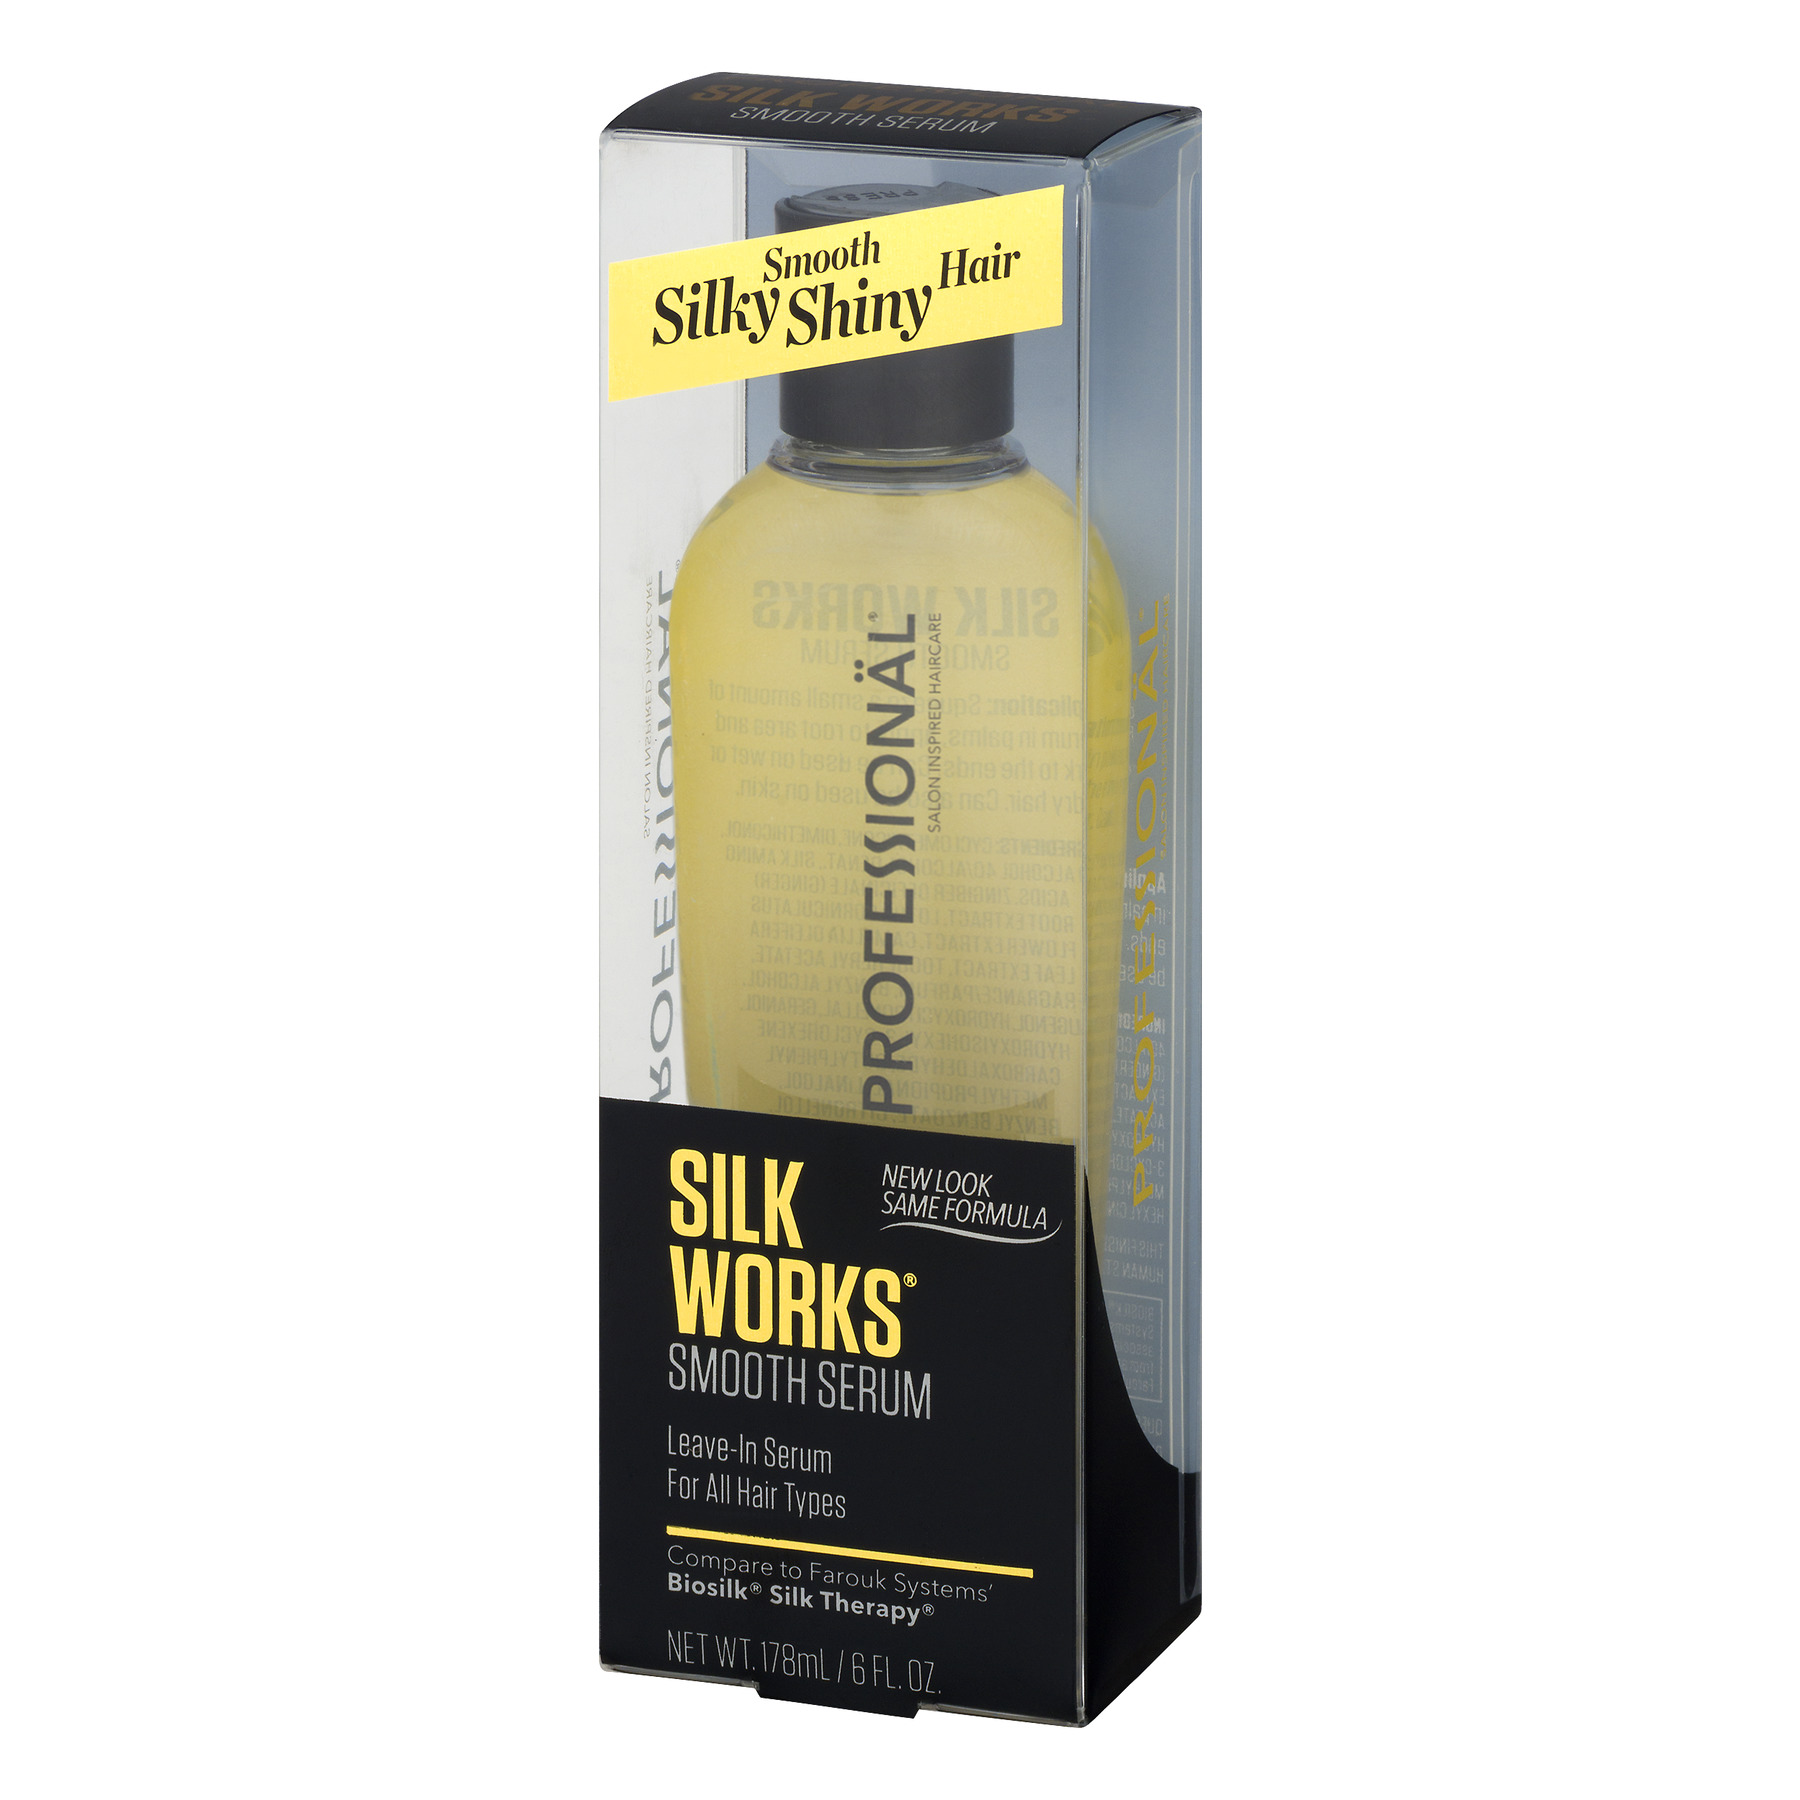 Silk Works Smooth Serum For All Hair, Silky Hair Serum Smoothing Treatment, 6 Oz - image 5 of 5